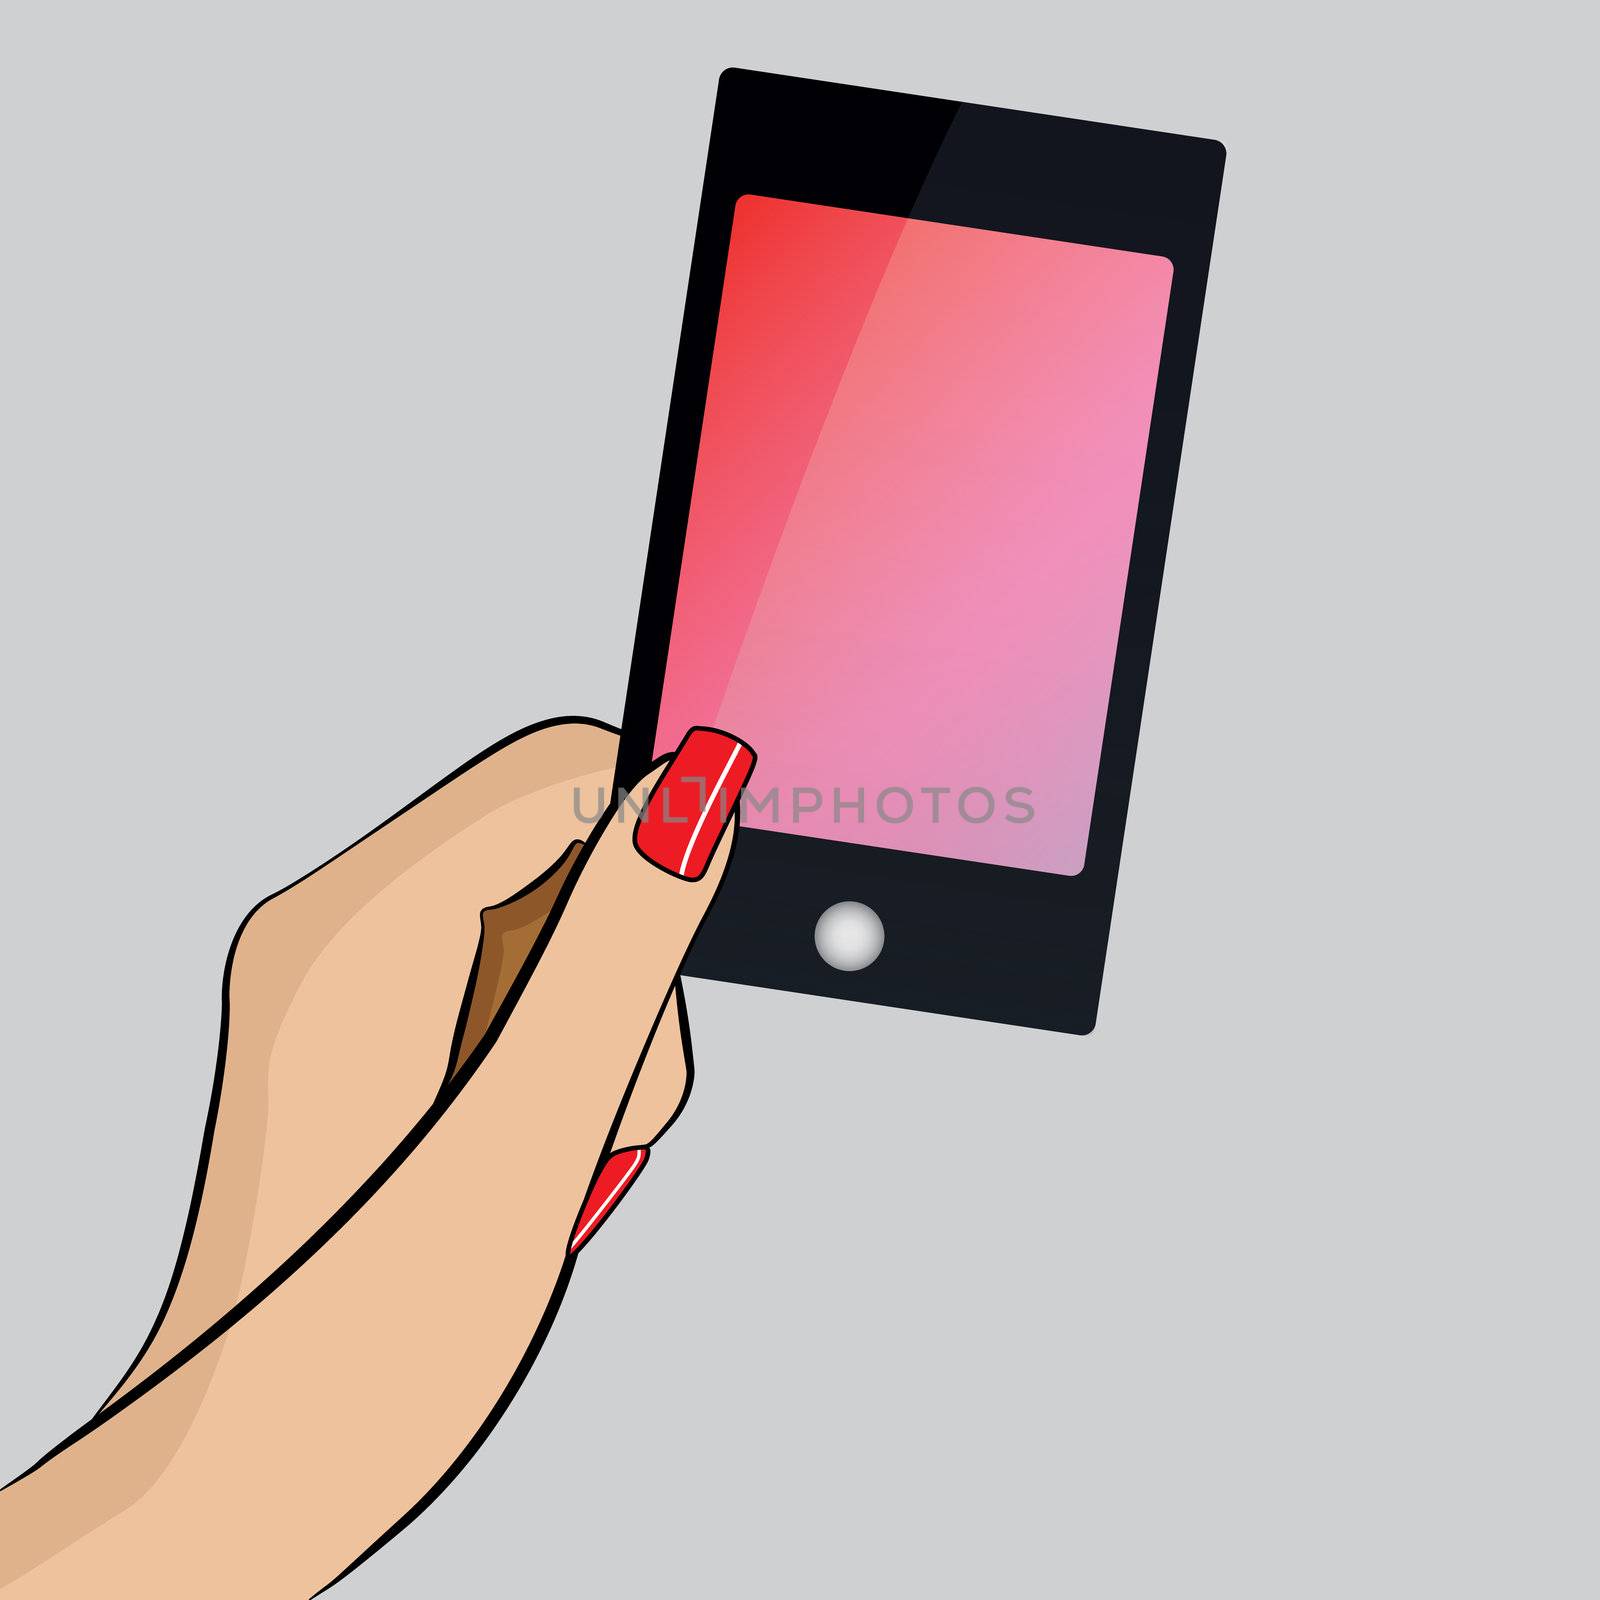 A Pop Art Illustration of a hand with a Tablet PC